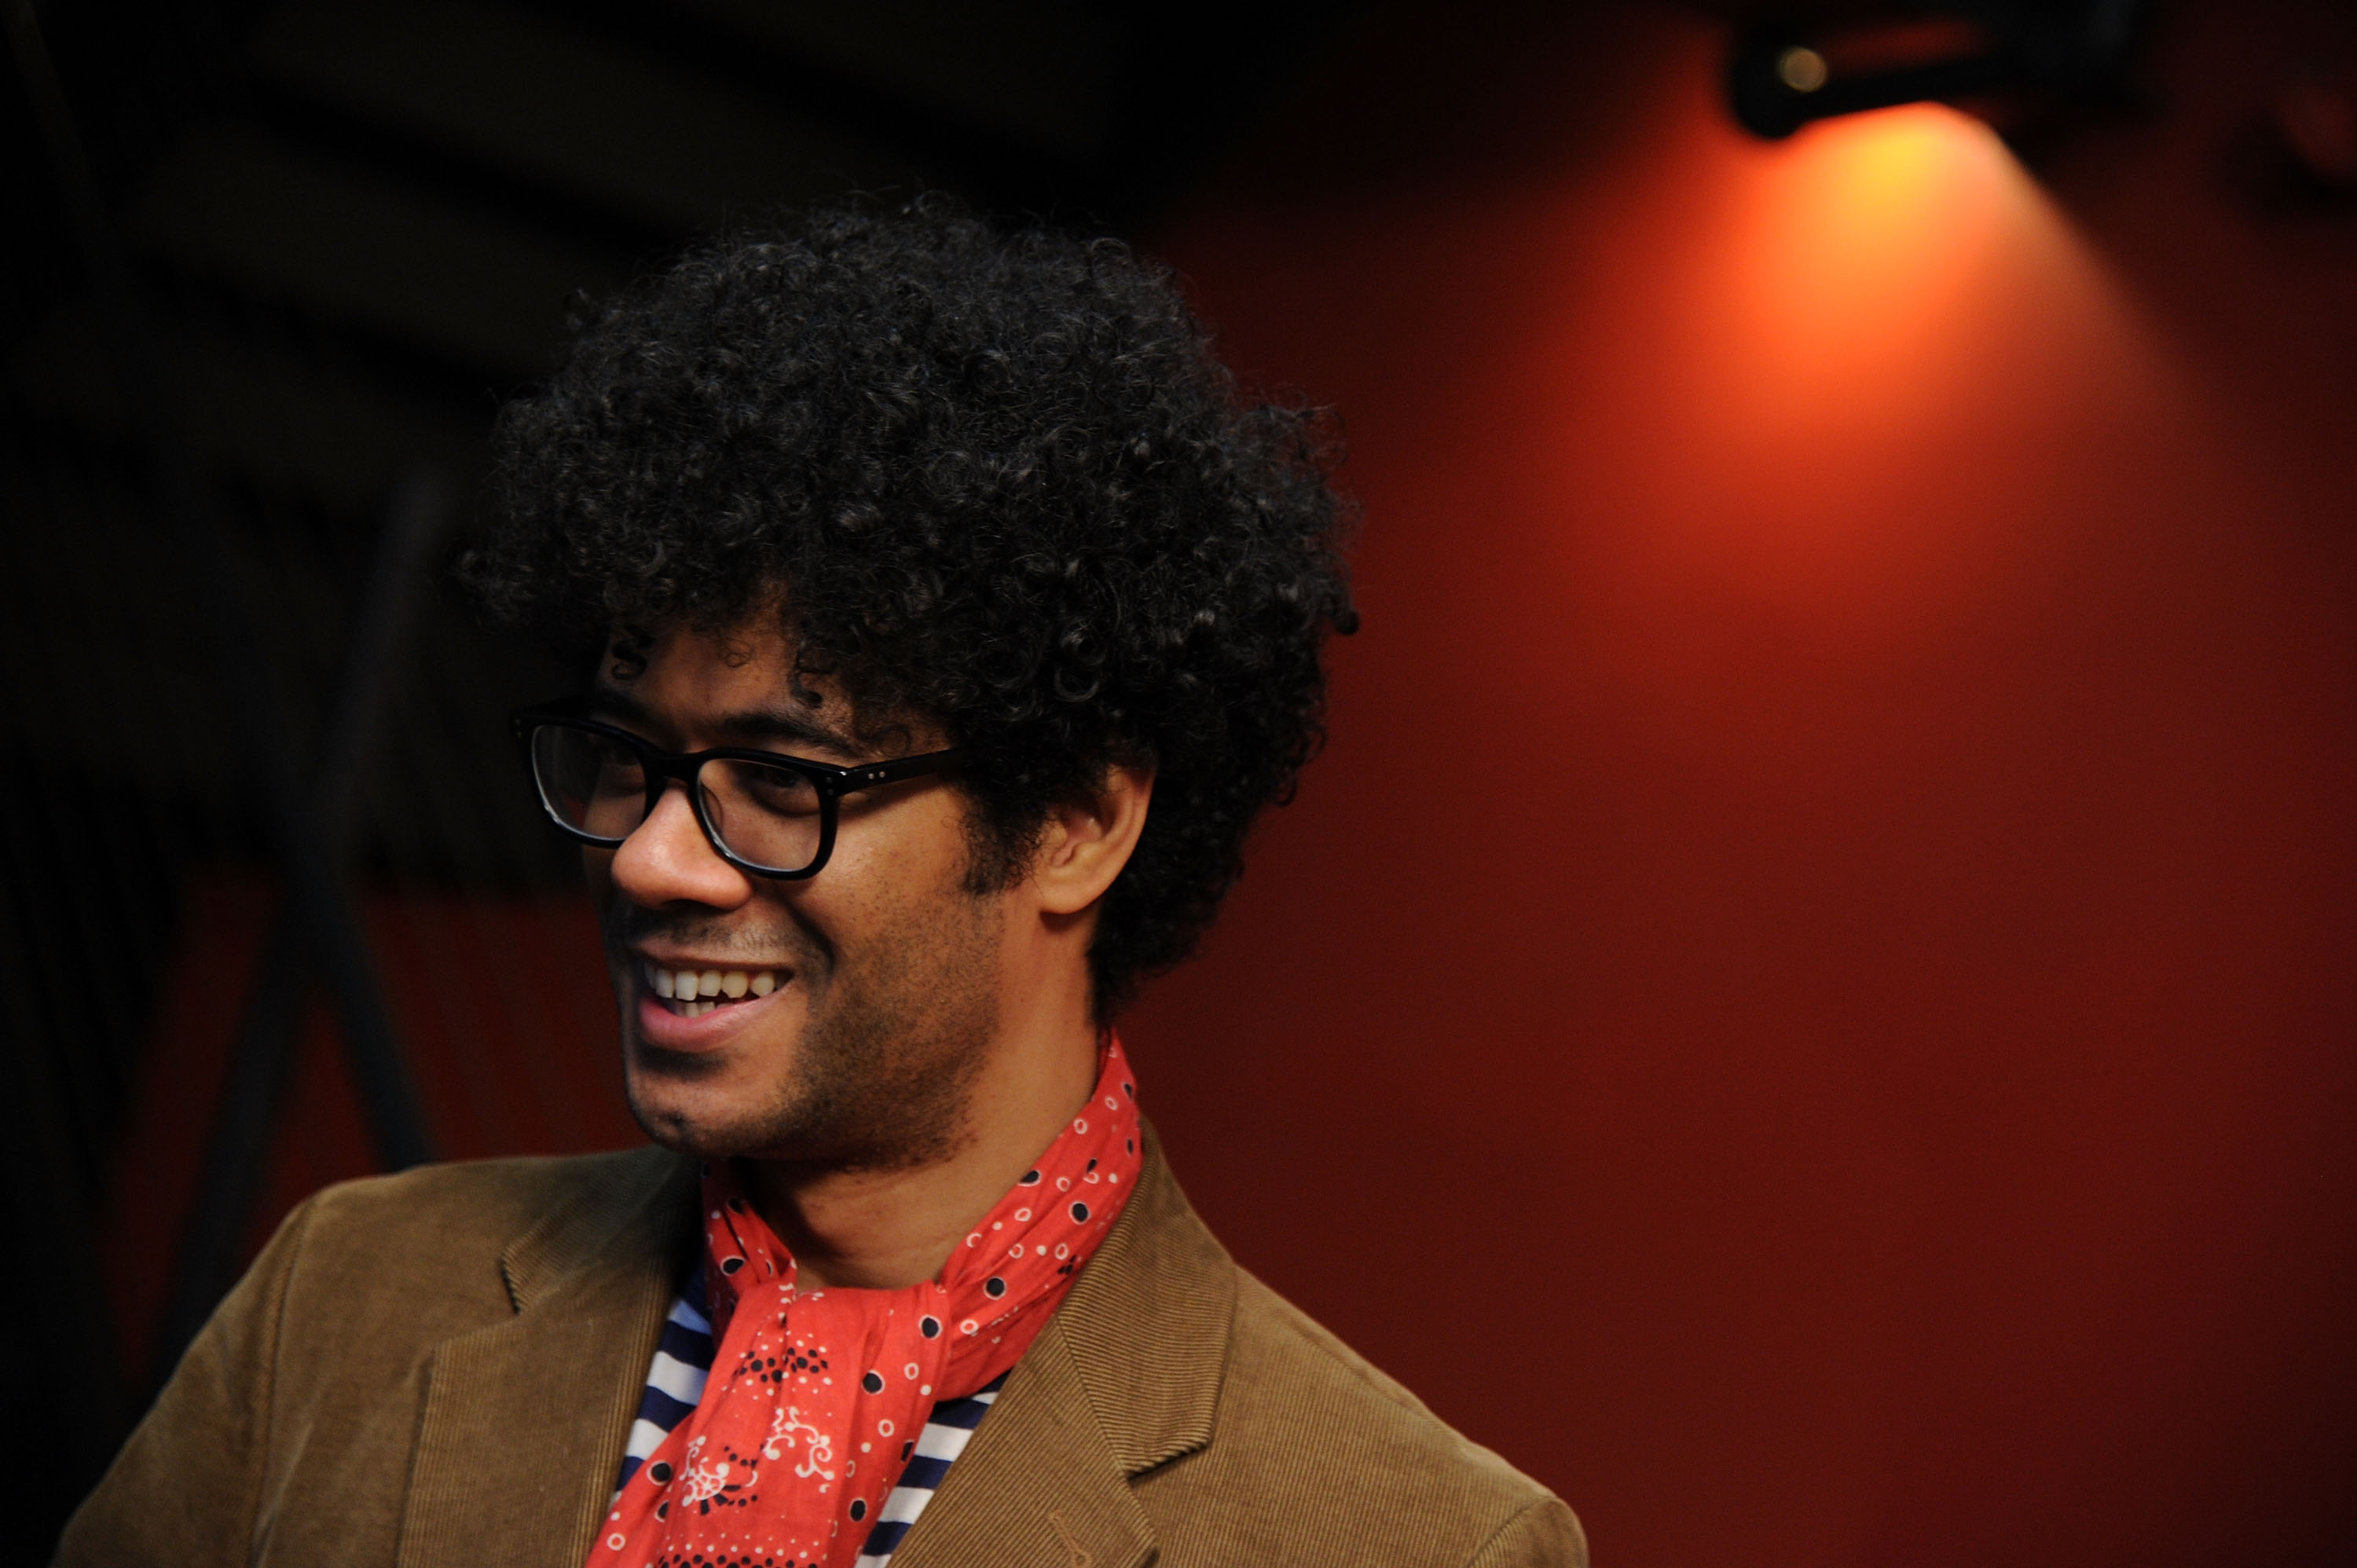 Richard Ayoade at the screening of "The Double" on April 30, 2014, in New York. | Source: Getty Images